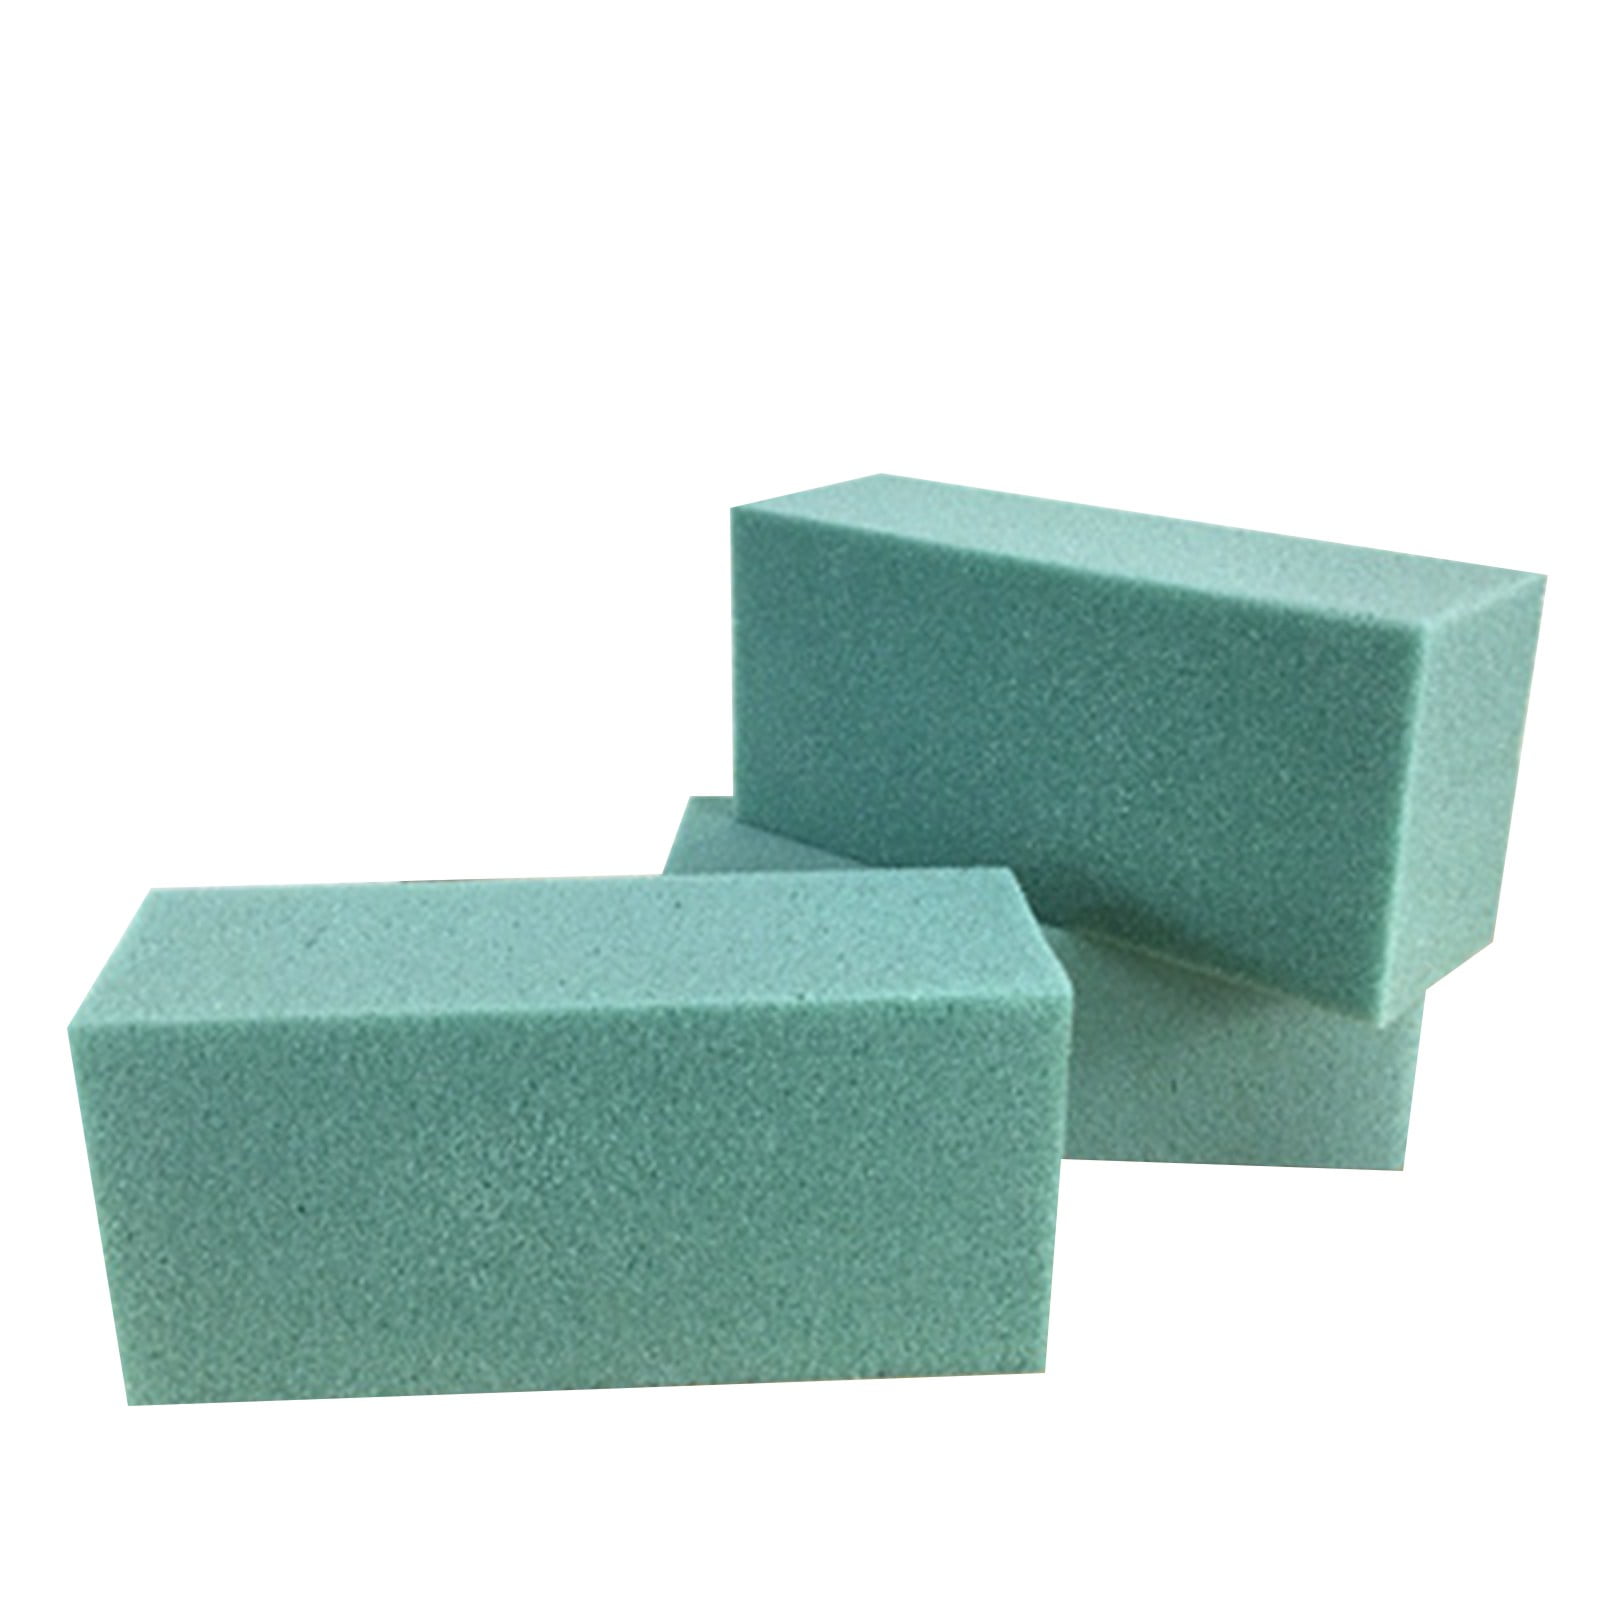 NRUDPQV Square Floral Foam Blocks Dry Floral Foam for Artificial Flowers  Craft Project 